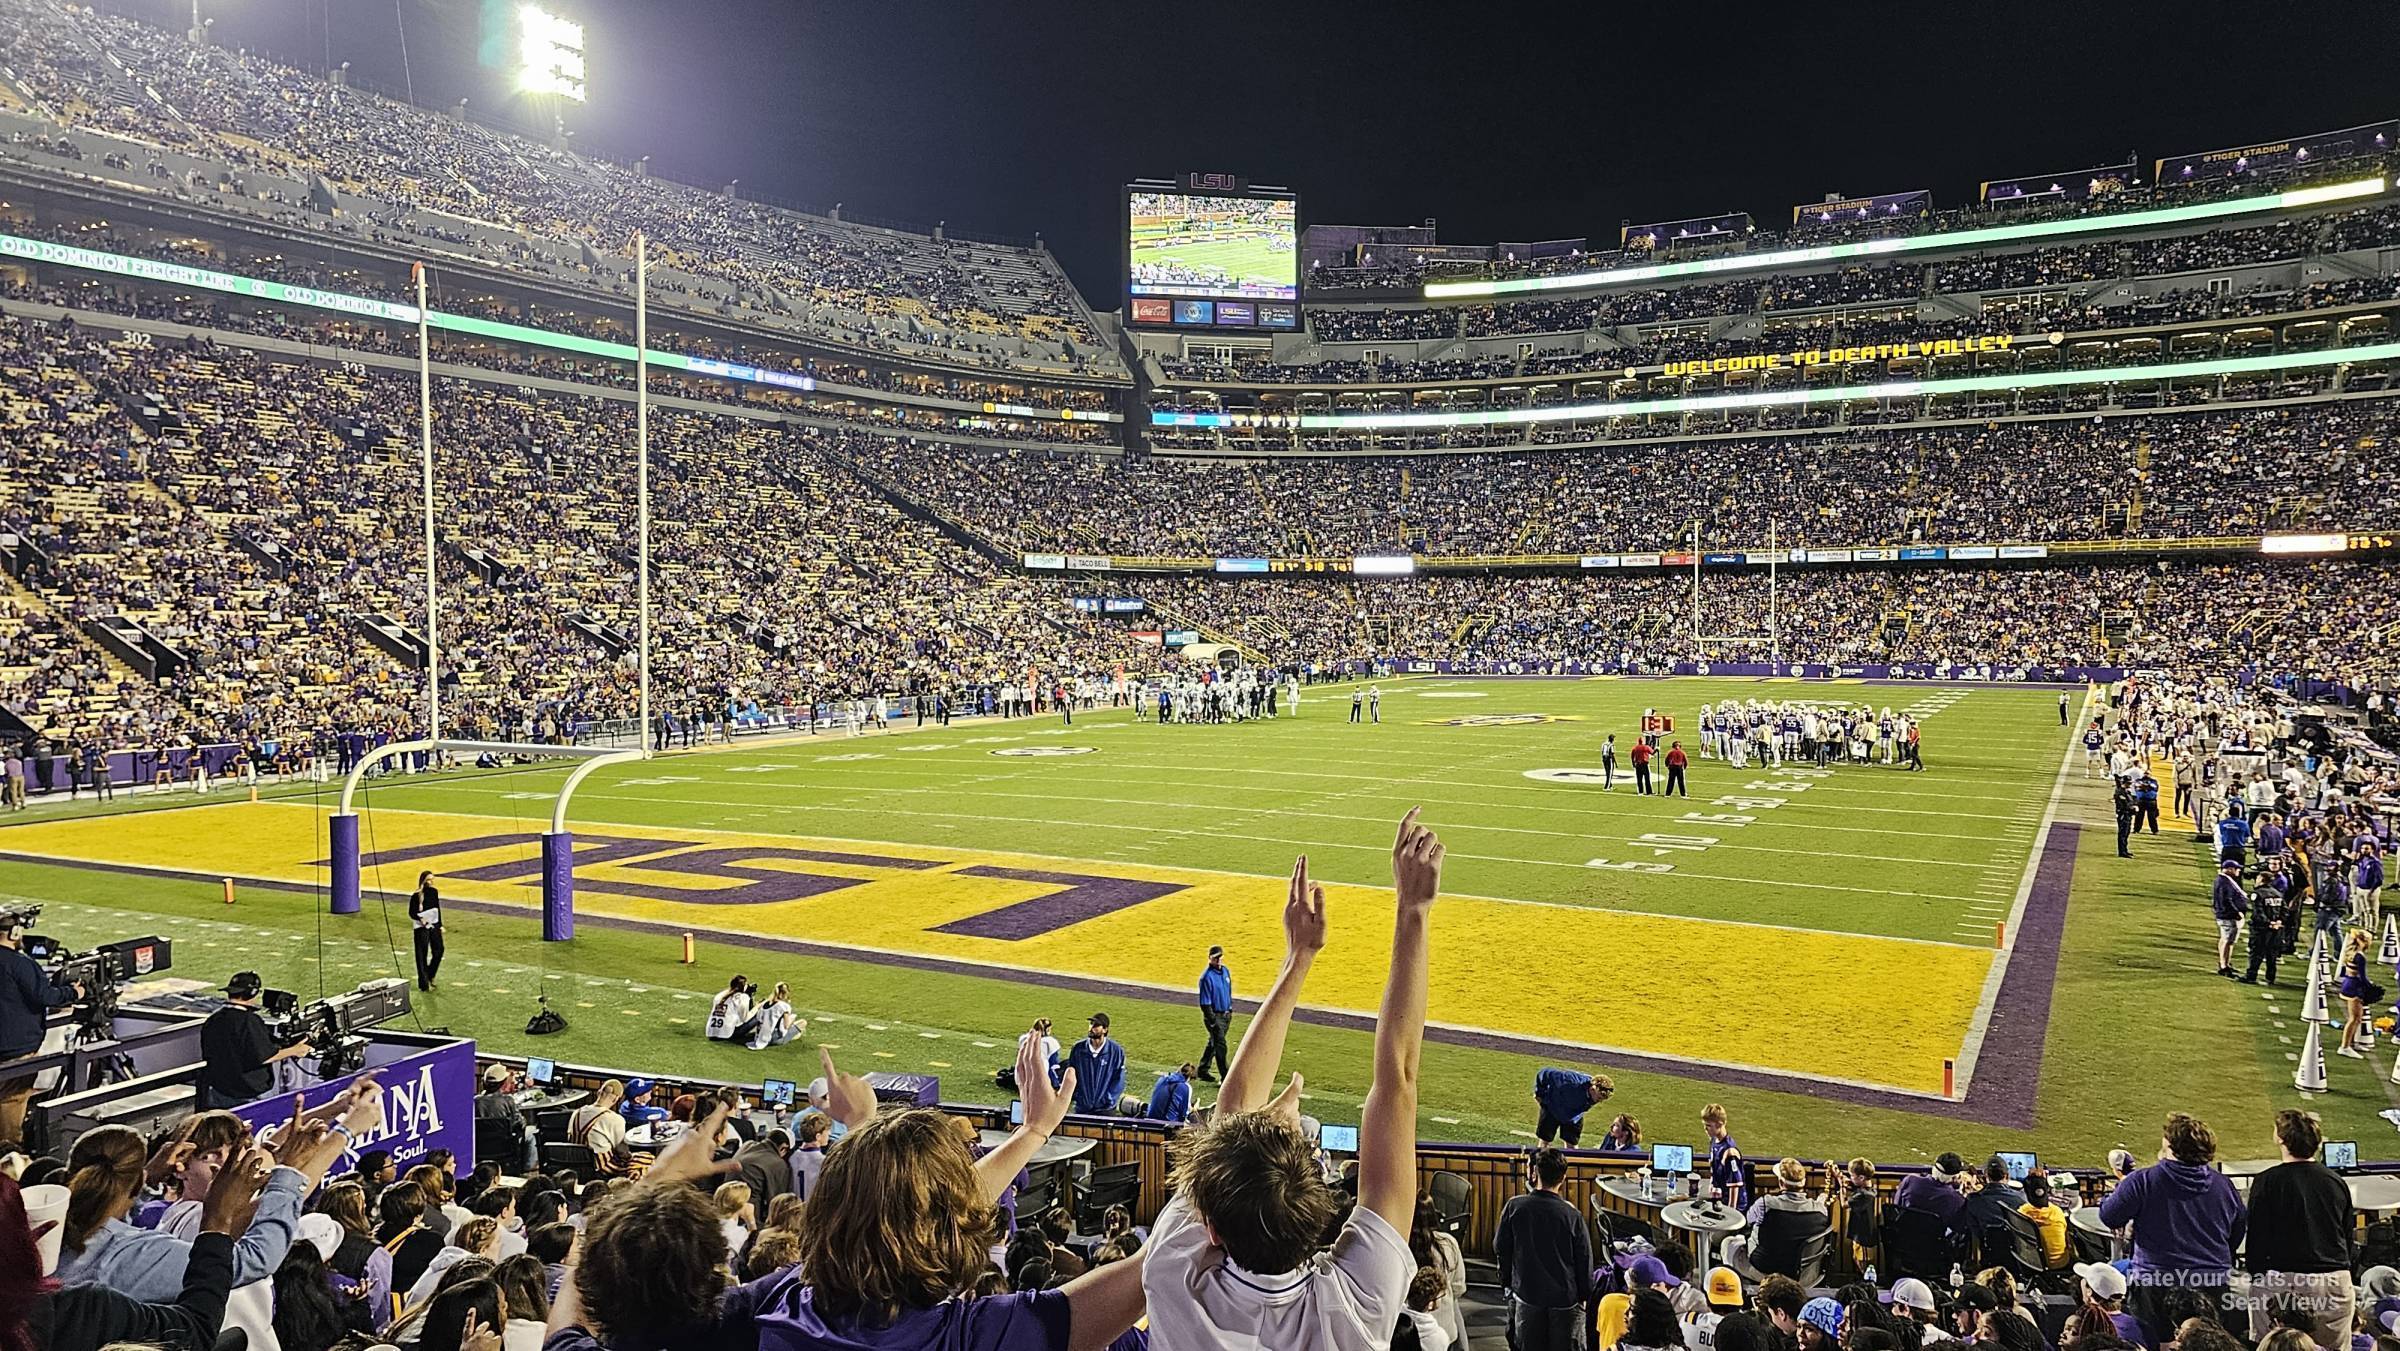 section 218, row 1 seat view  - tiger stadium